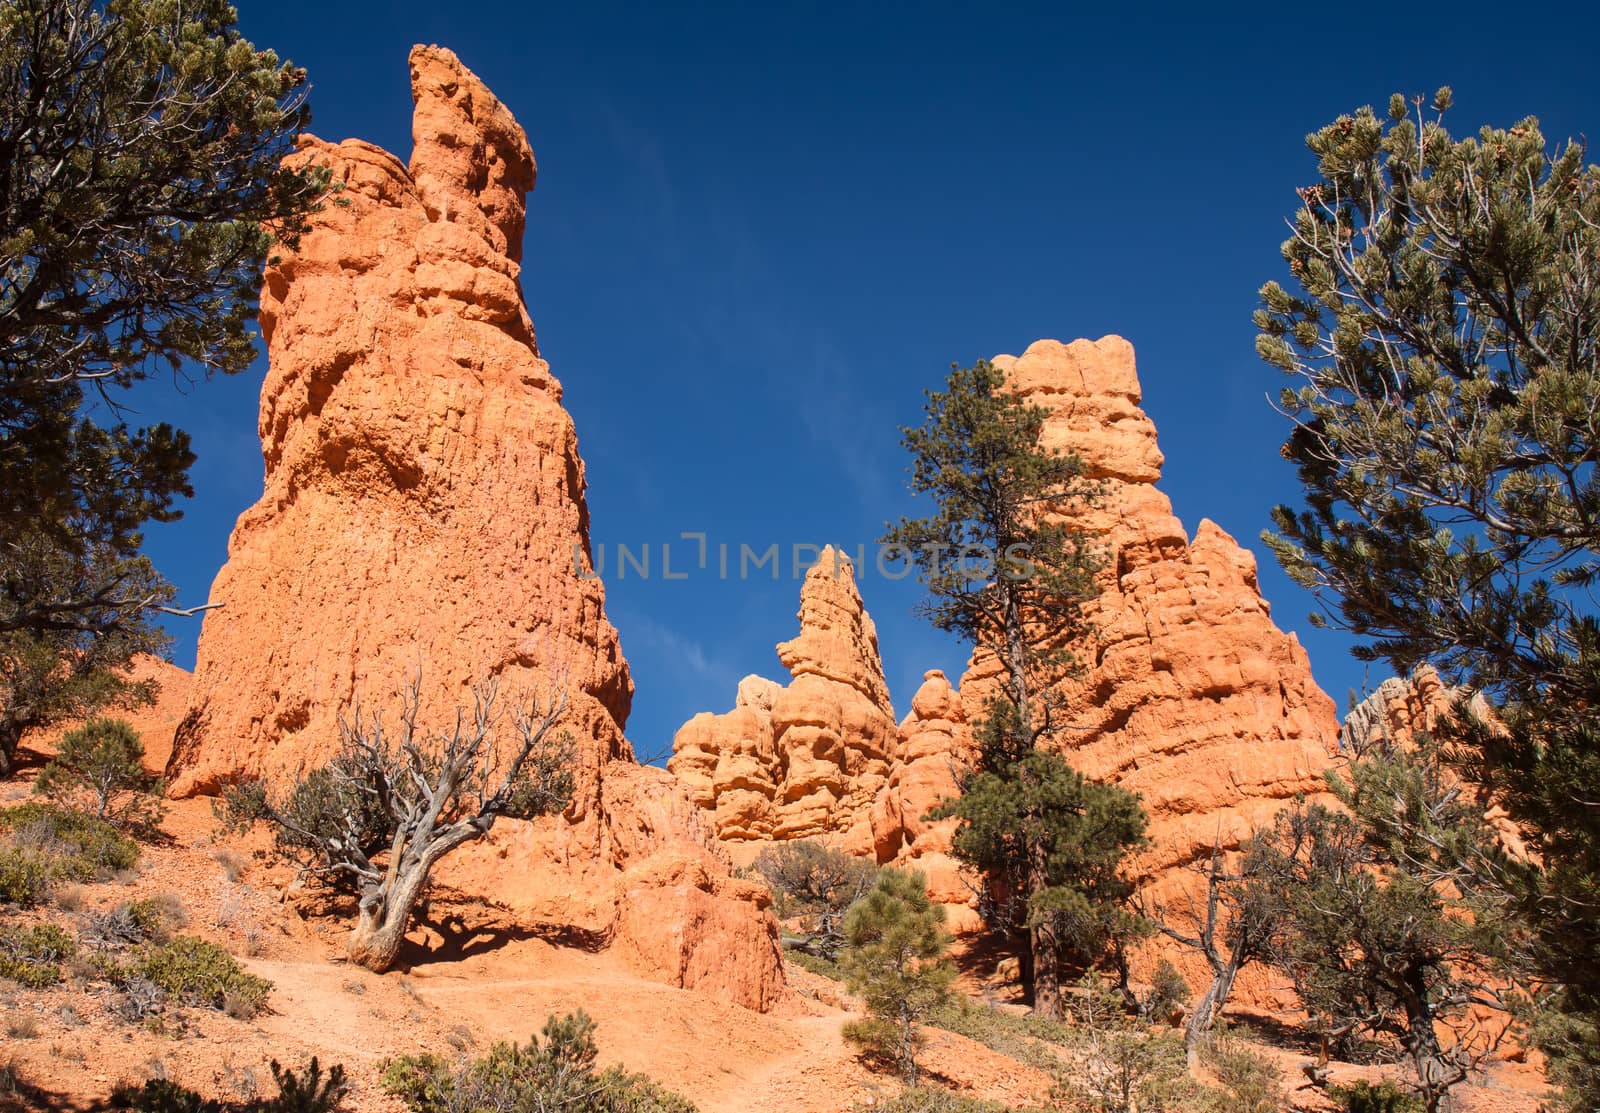 Red Canyon State Park in Utah provides scene upon scene of delight for photographers of all kinds.